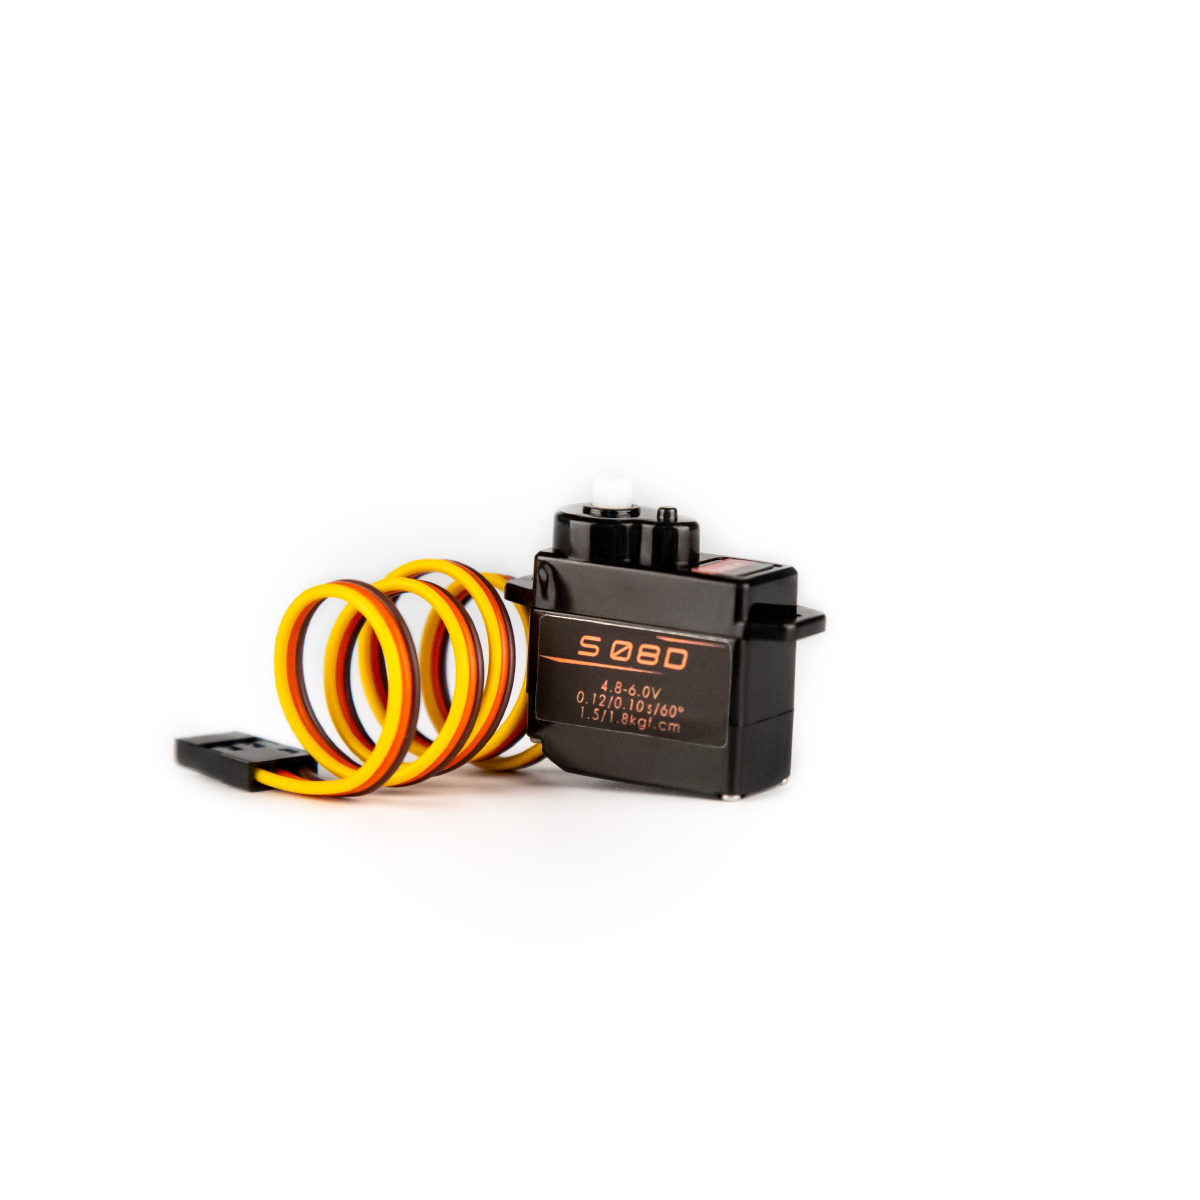 Bcato S08D 9g Plastic Gear Micro Digital Servo for RC Helicopter Airplane RC Quadcopter